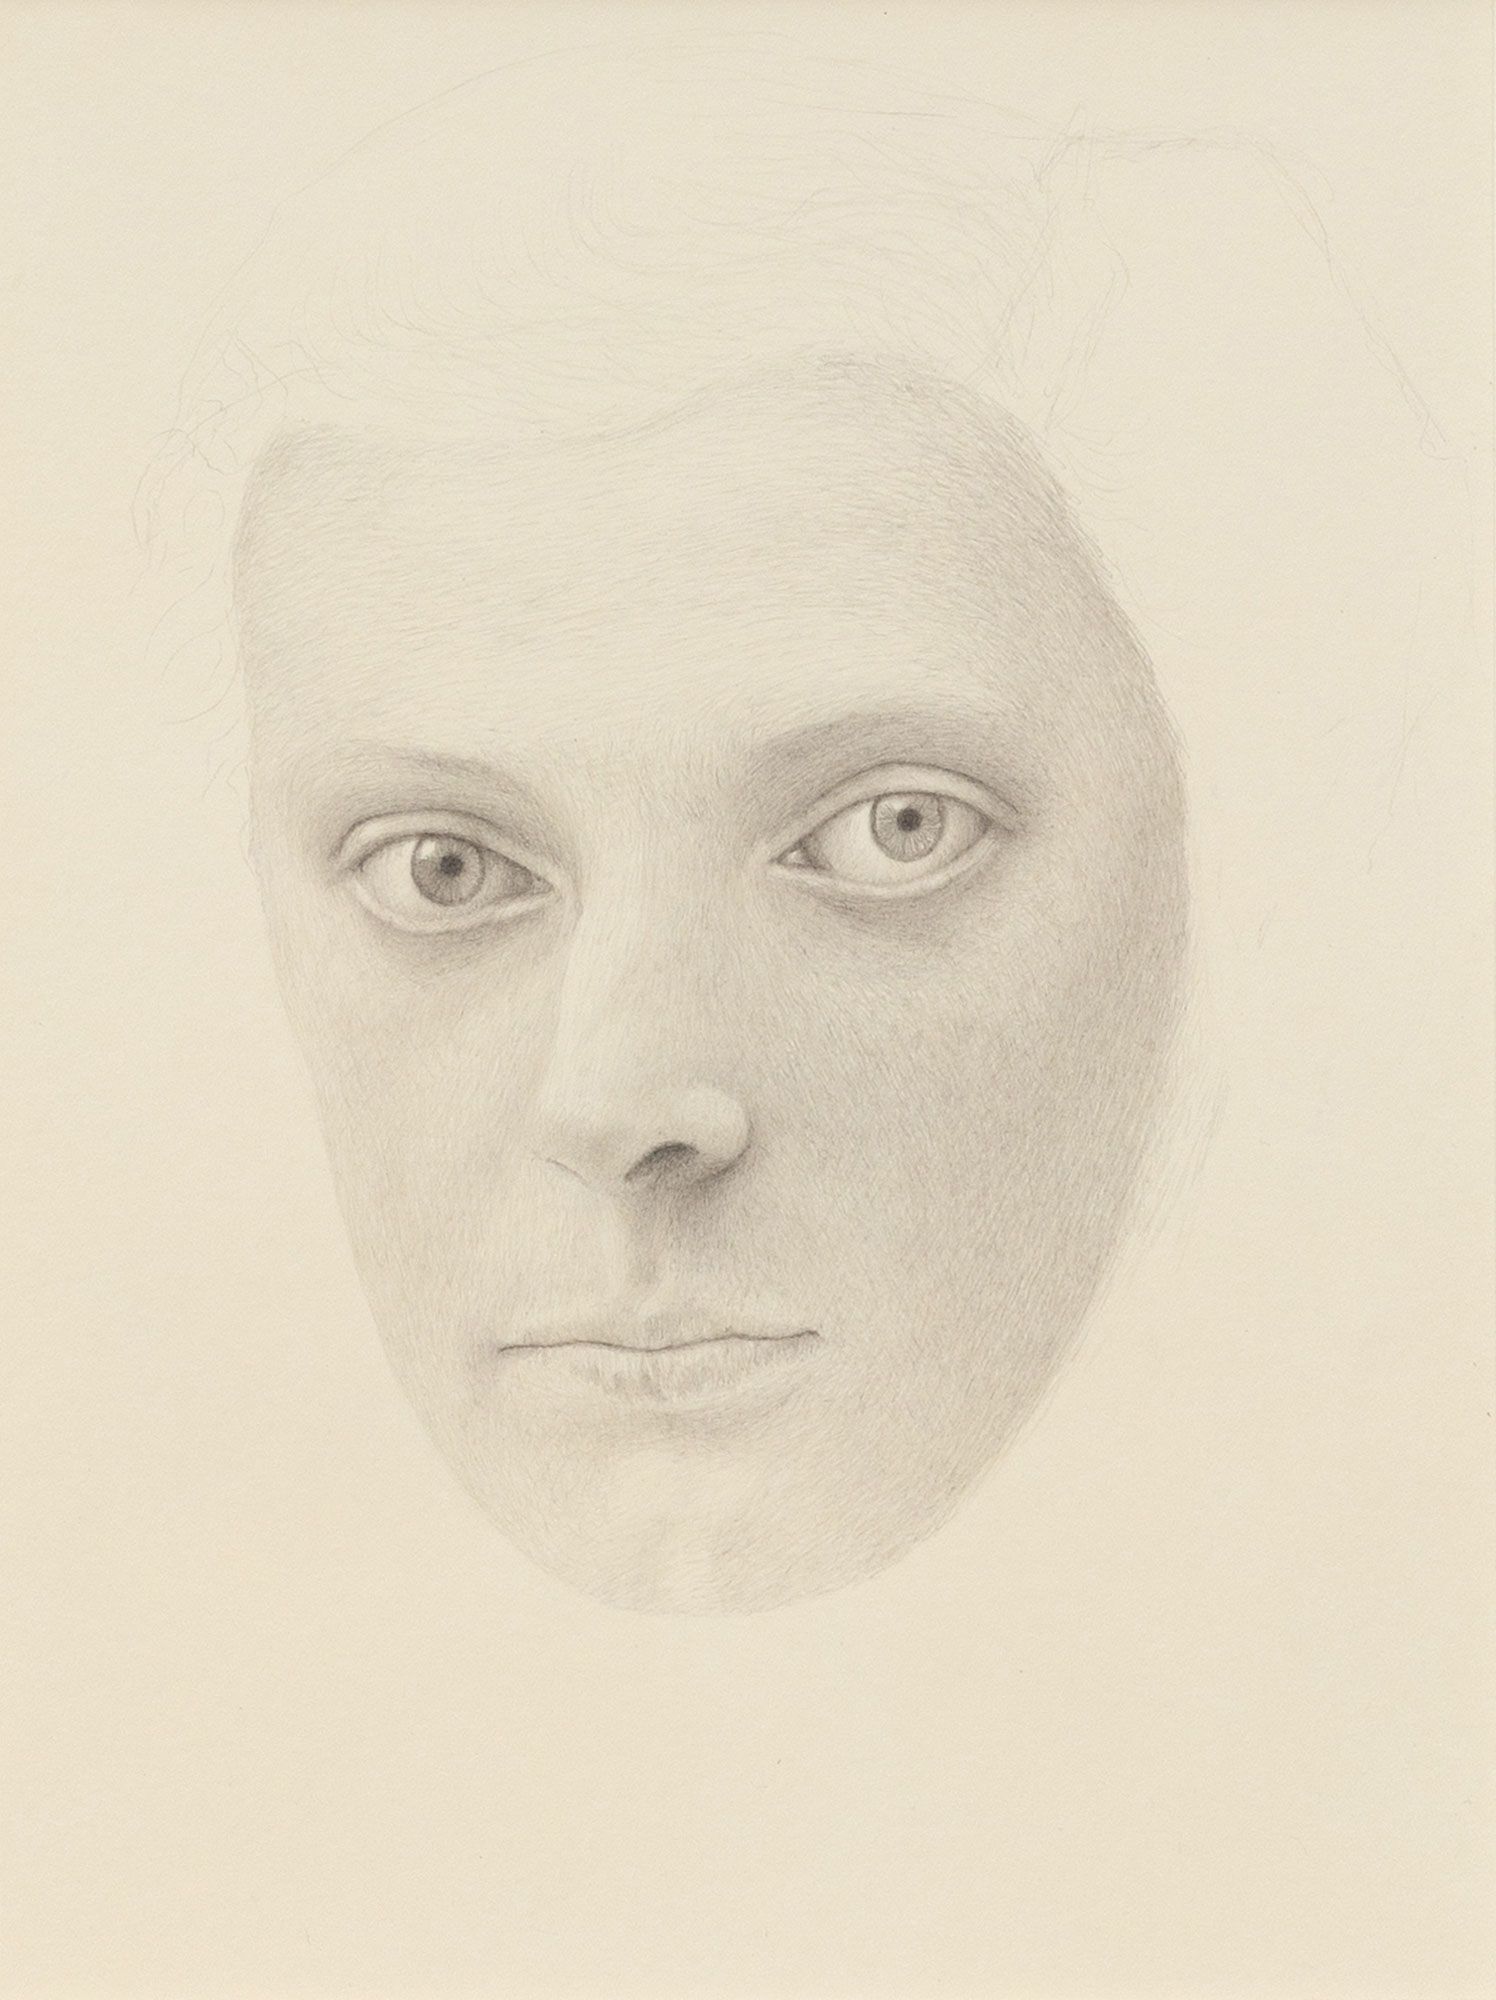 Detailed pencil sketch of a contemplative face with piercing eyes and subtle shading by Mark Alexander.